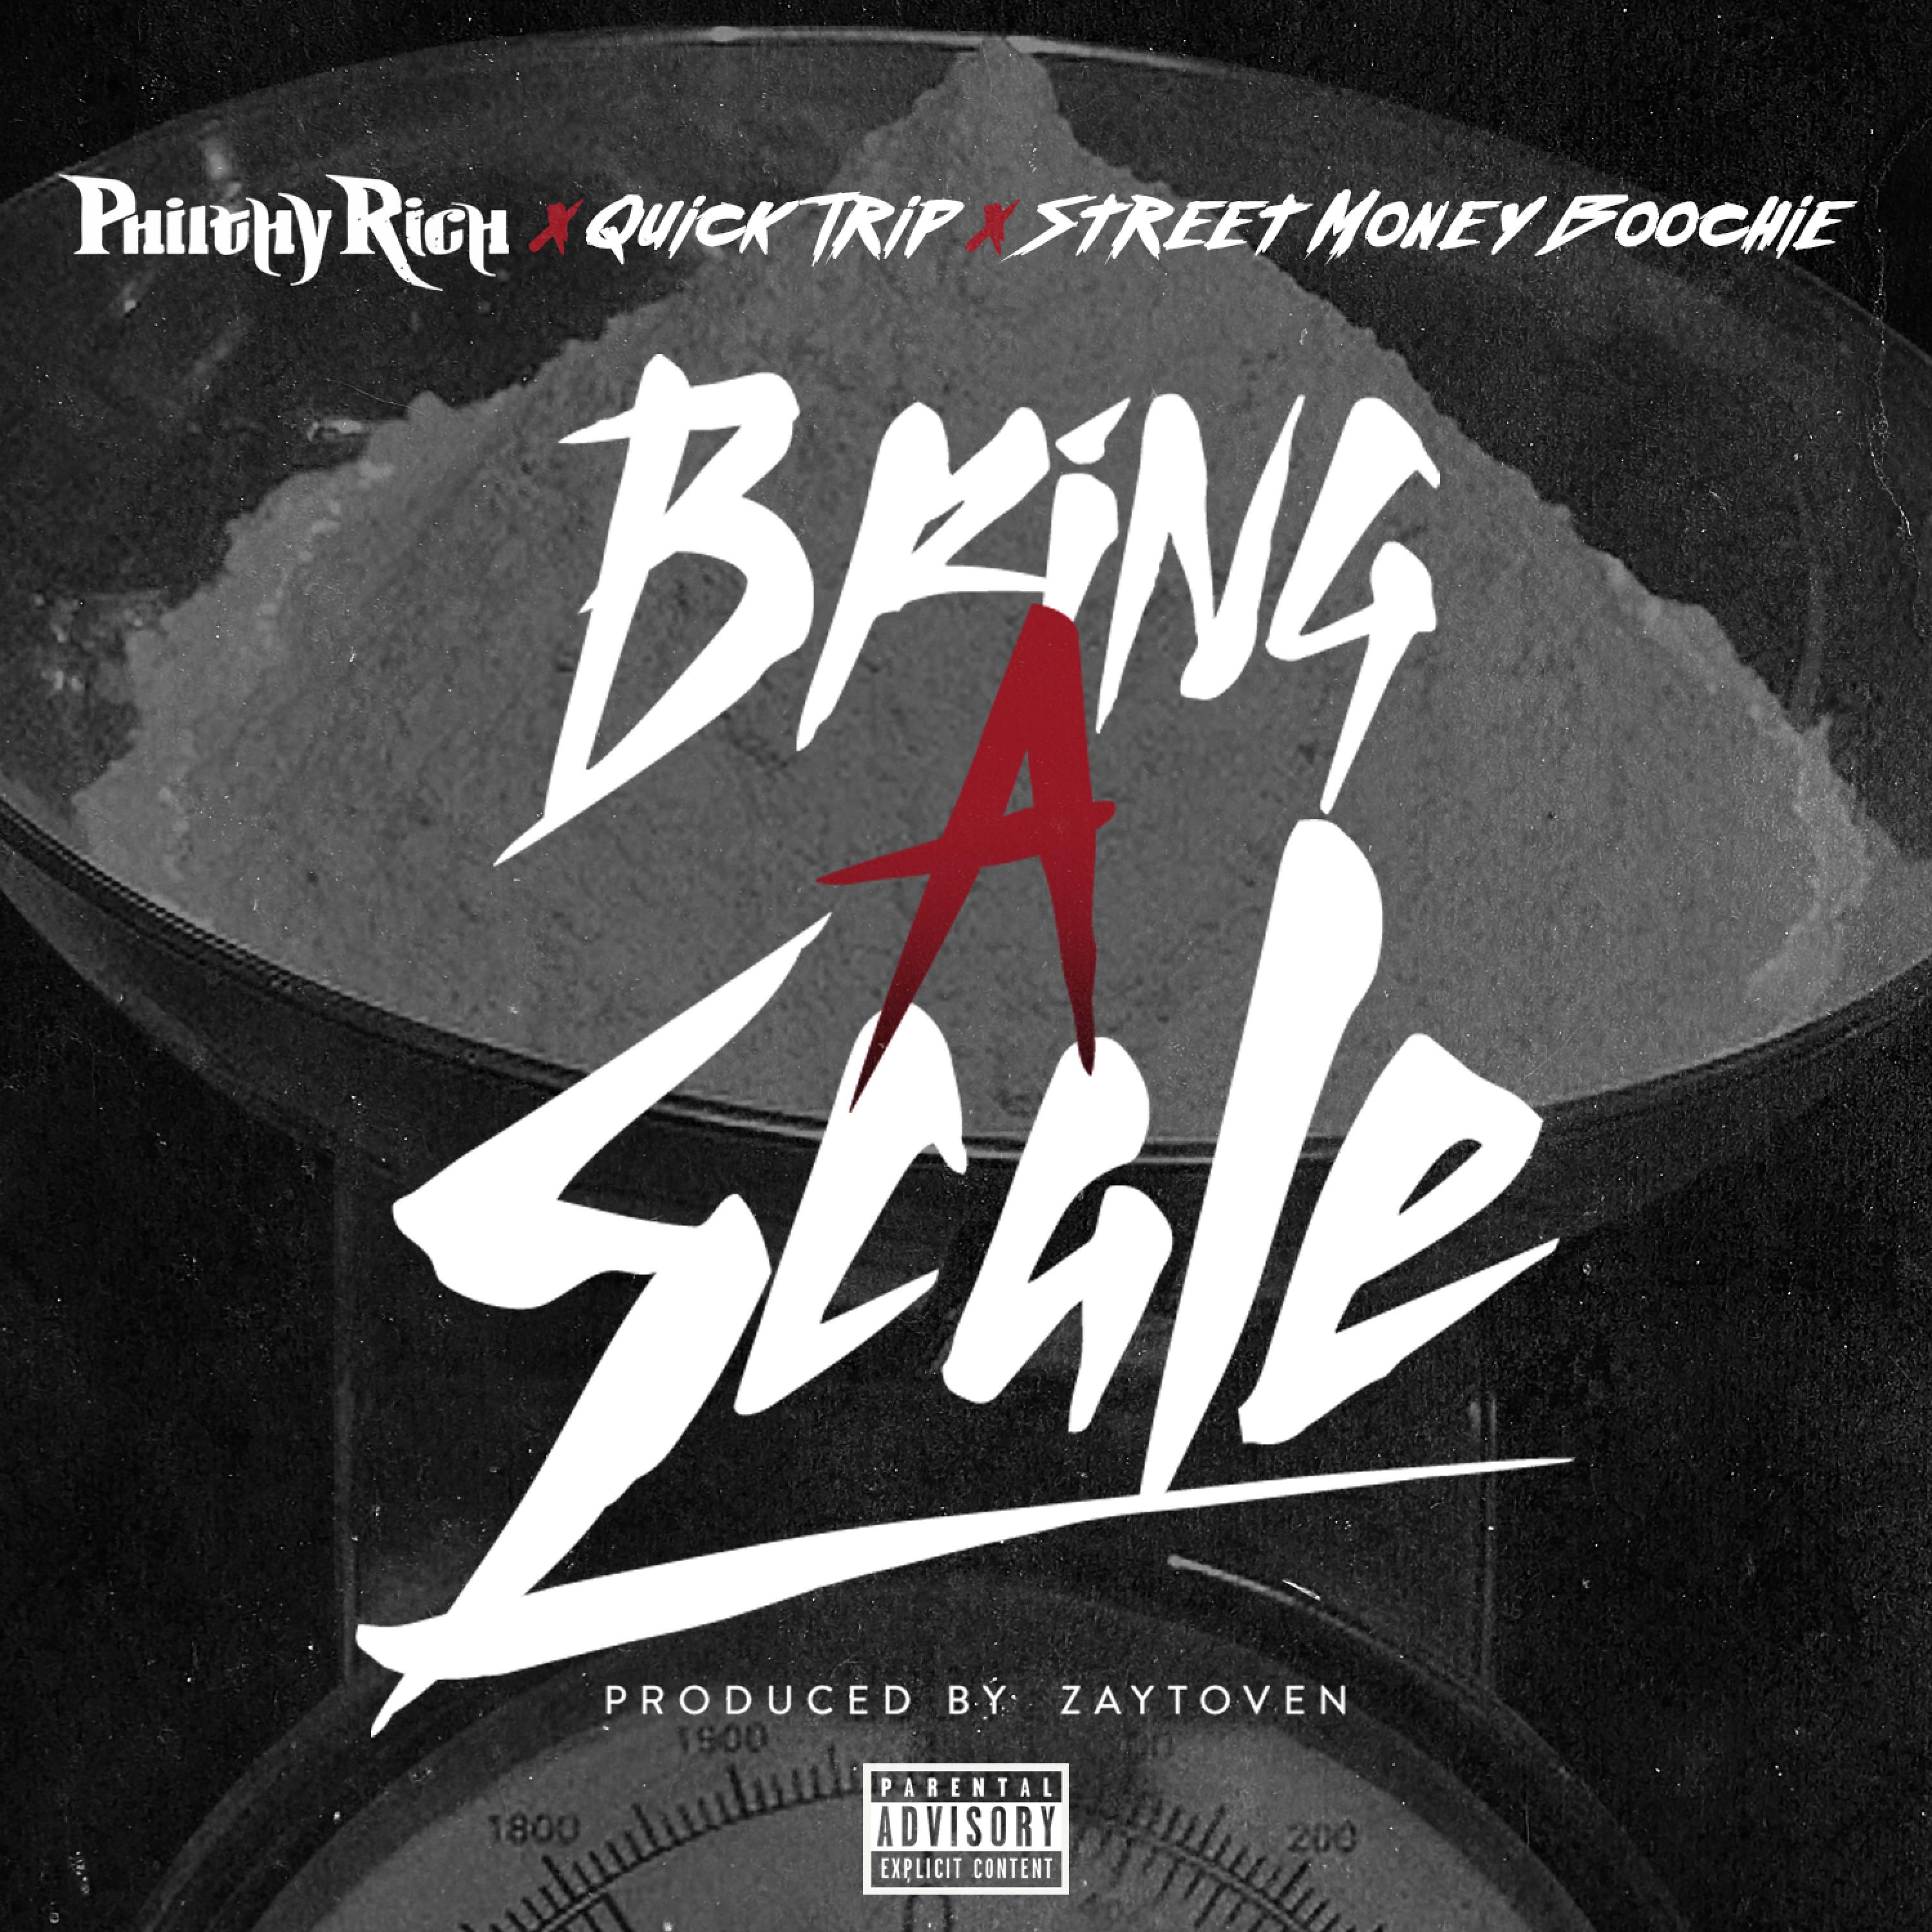 Bring a Scale (feat. Quick Trip & Street Money Boochie) - Single